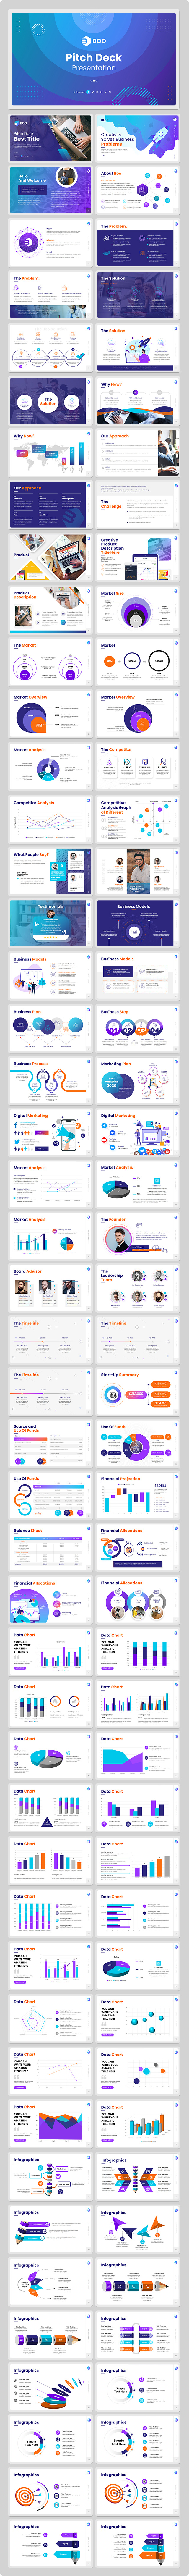 BOO - Pitch Deck PowerPoint Presentation Template - 4